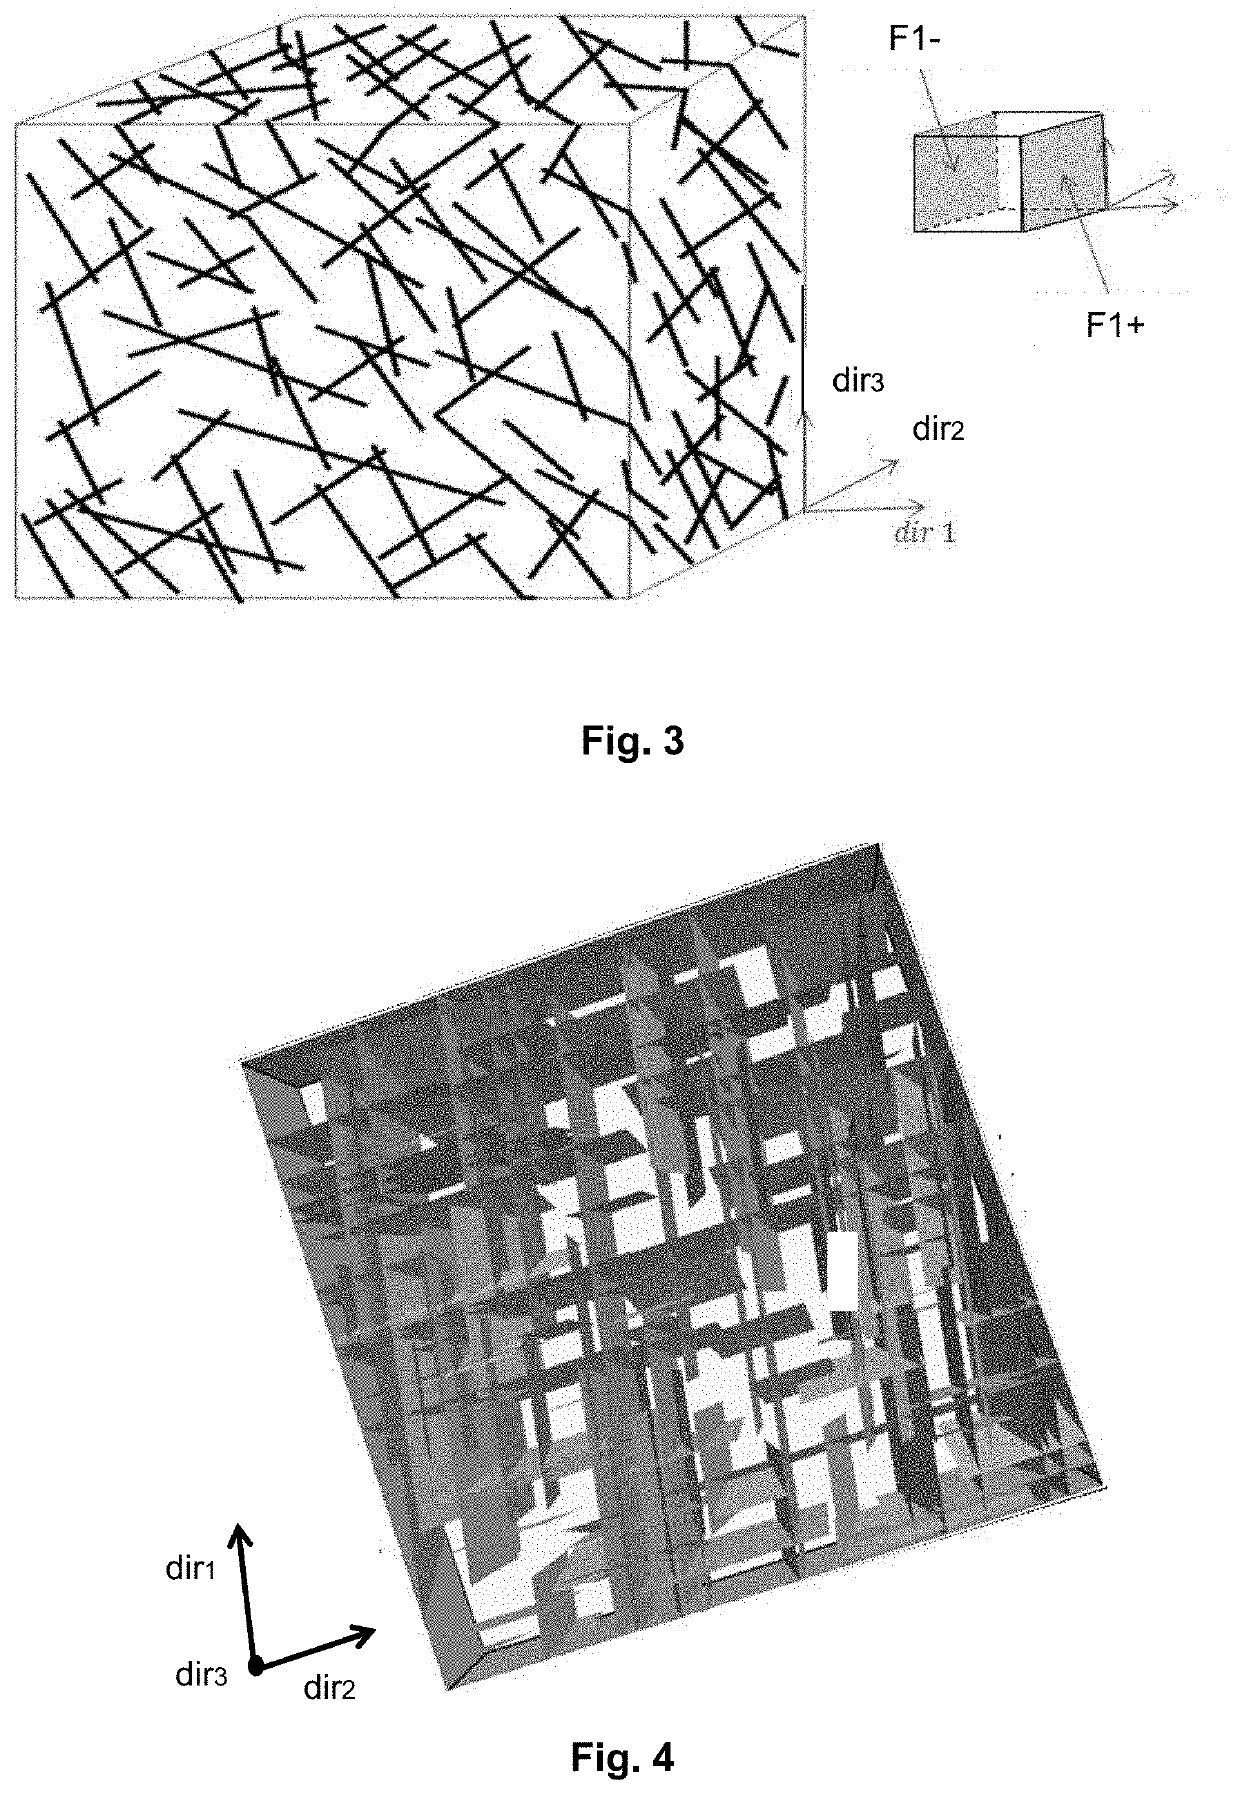 Method for characterizing and exploiting a subterranean formation comprising a network of fractures